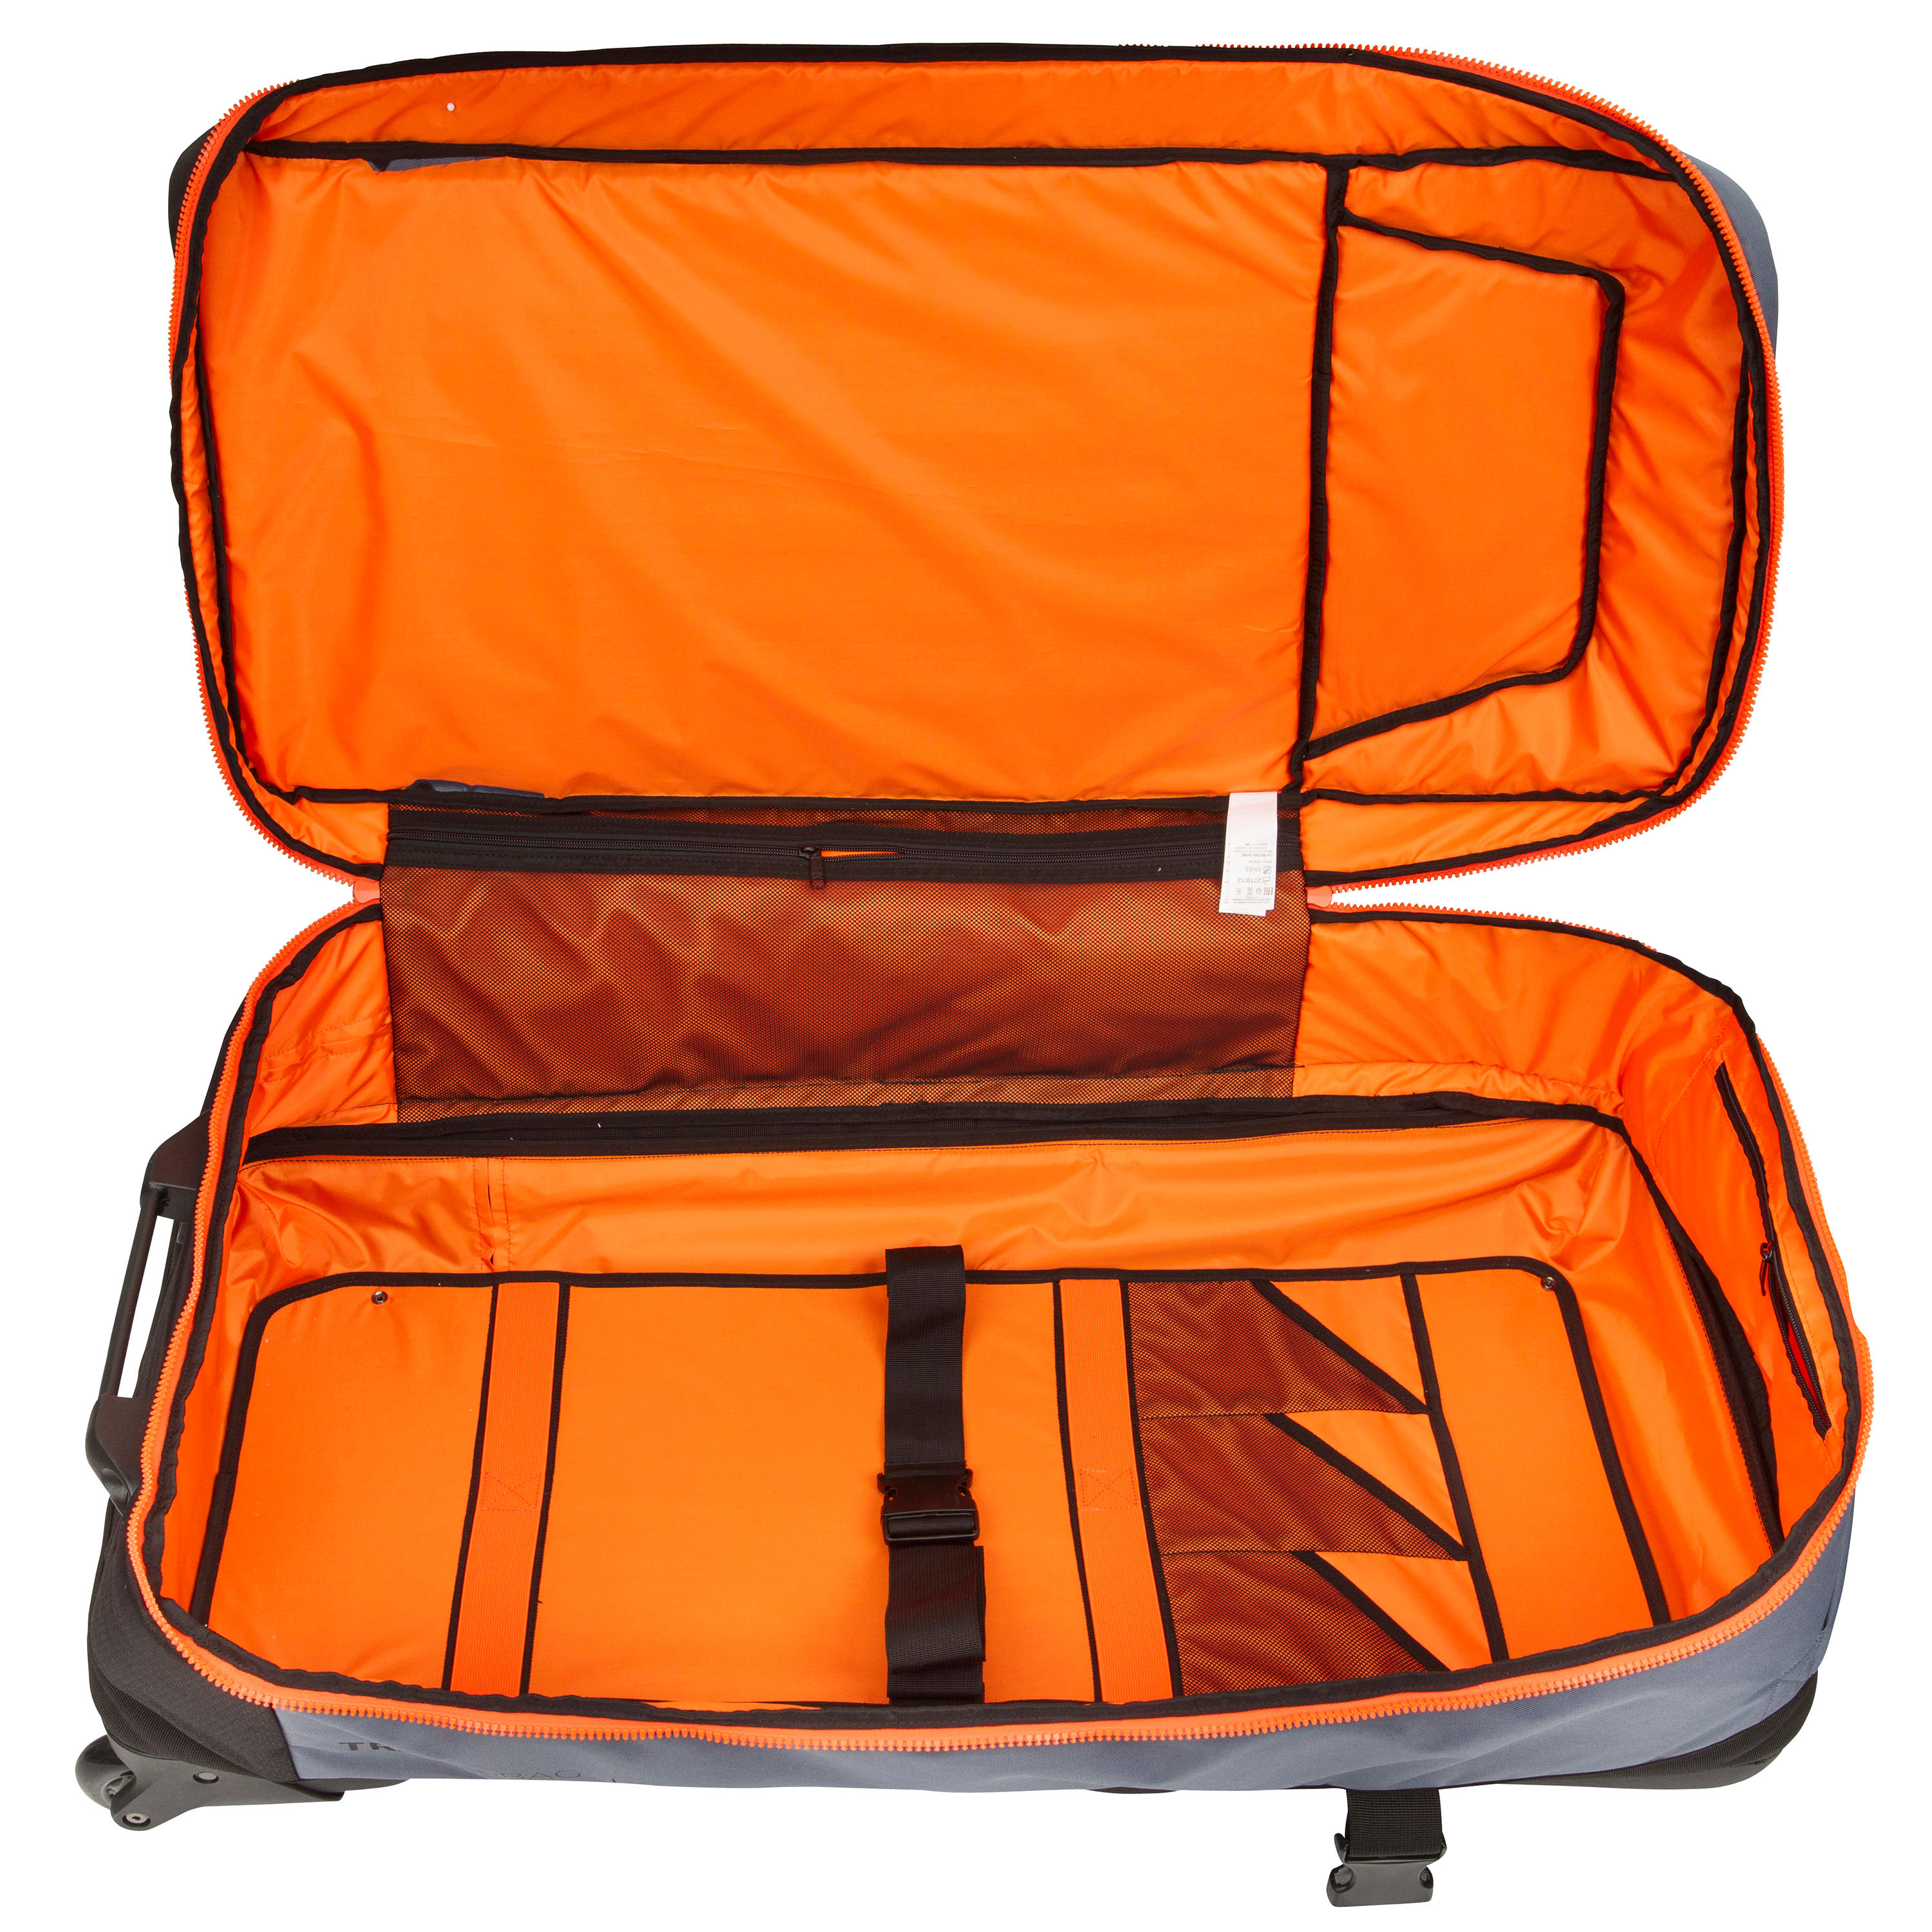 SHELLED TROLLEY TRAVEL BAG 140L FOR TRAVELLER WITH STAND UP PADDLE | STB500 9/21